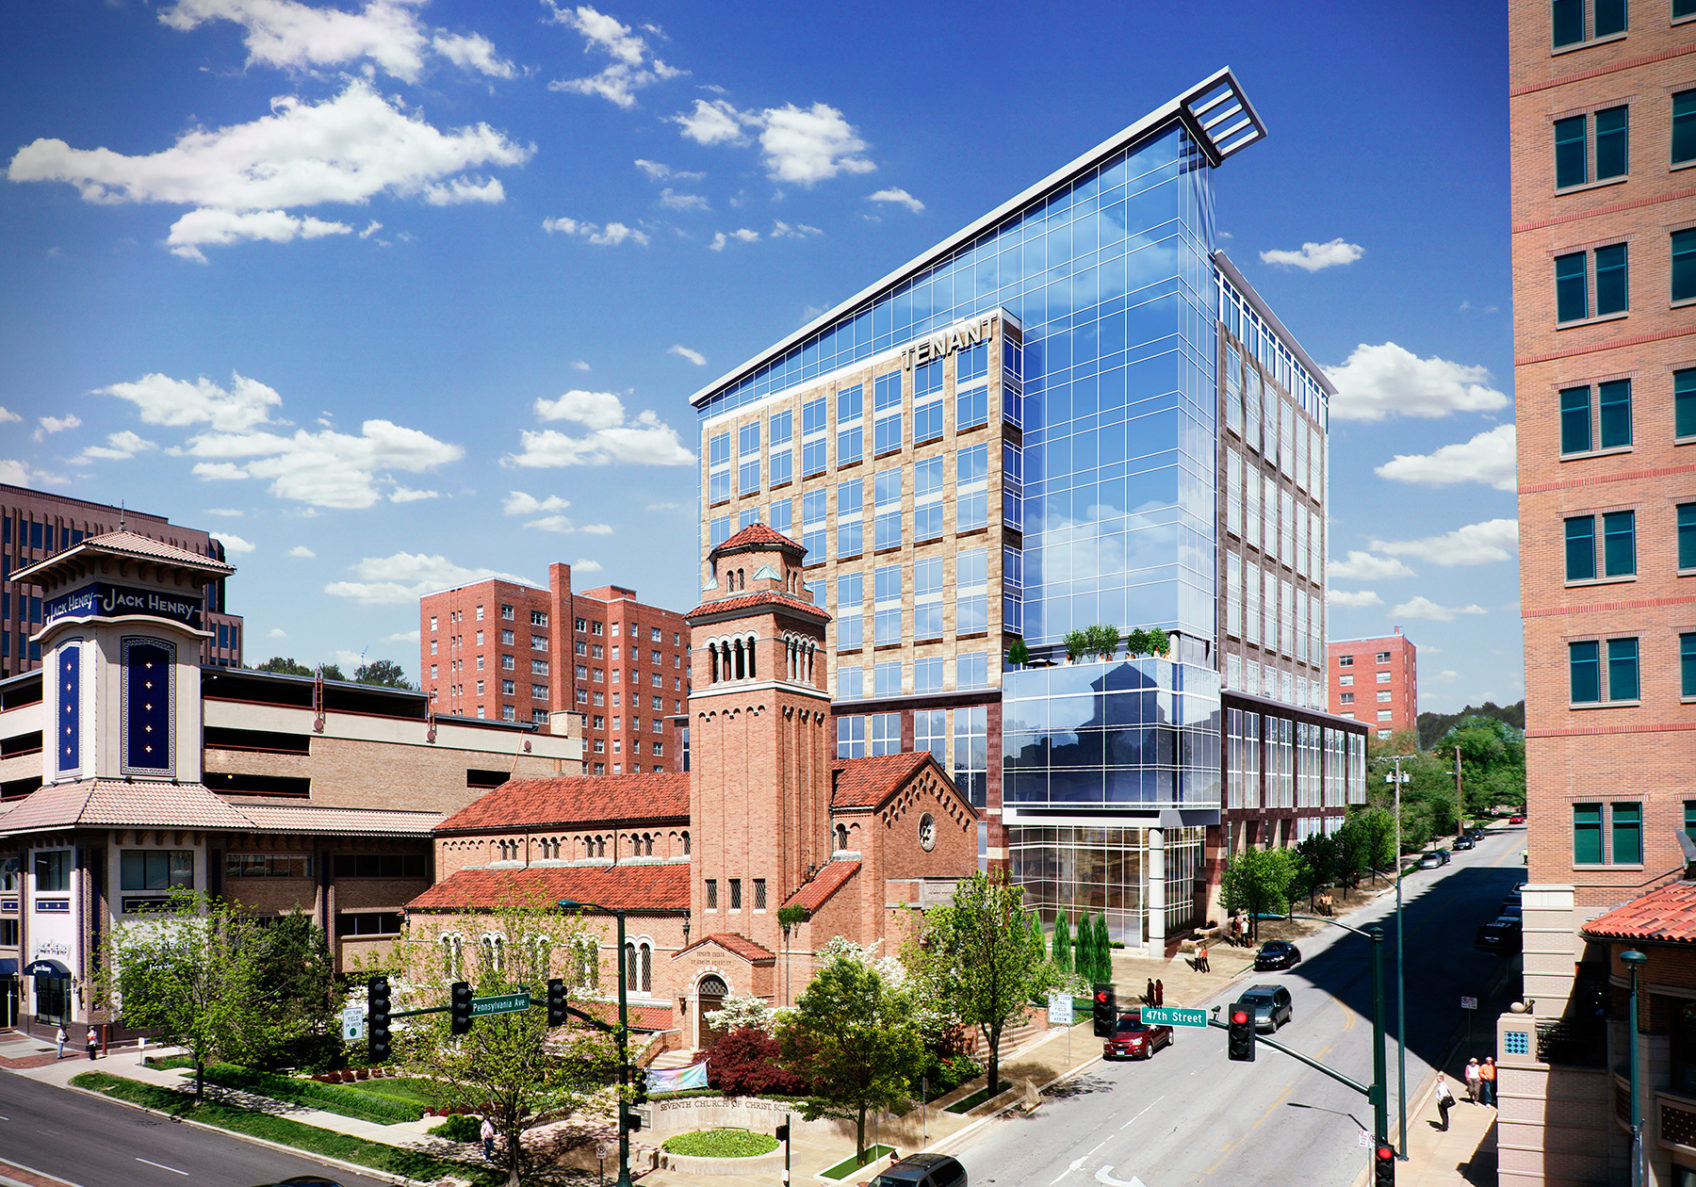 46 Penn Centre rendering in the Country Club Plaza